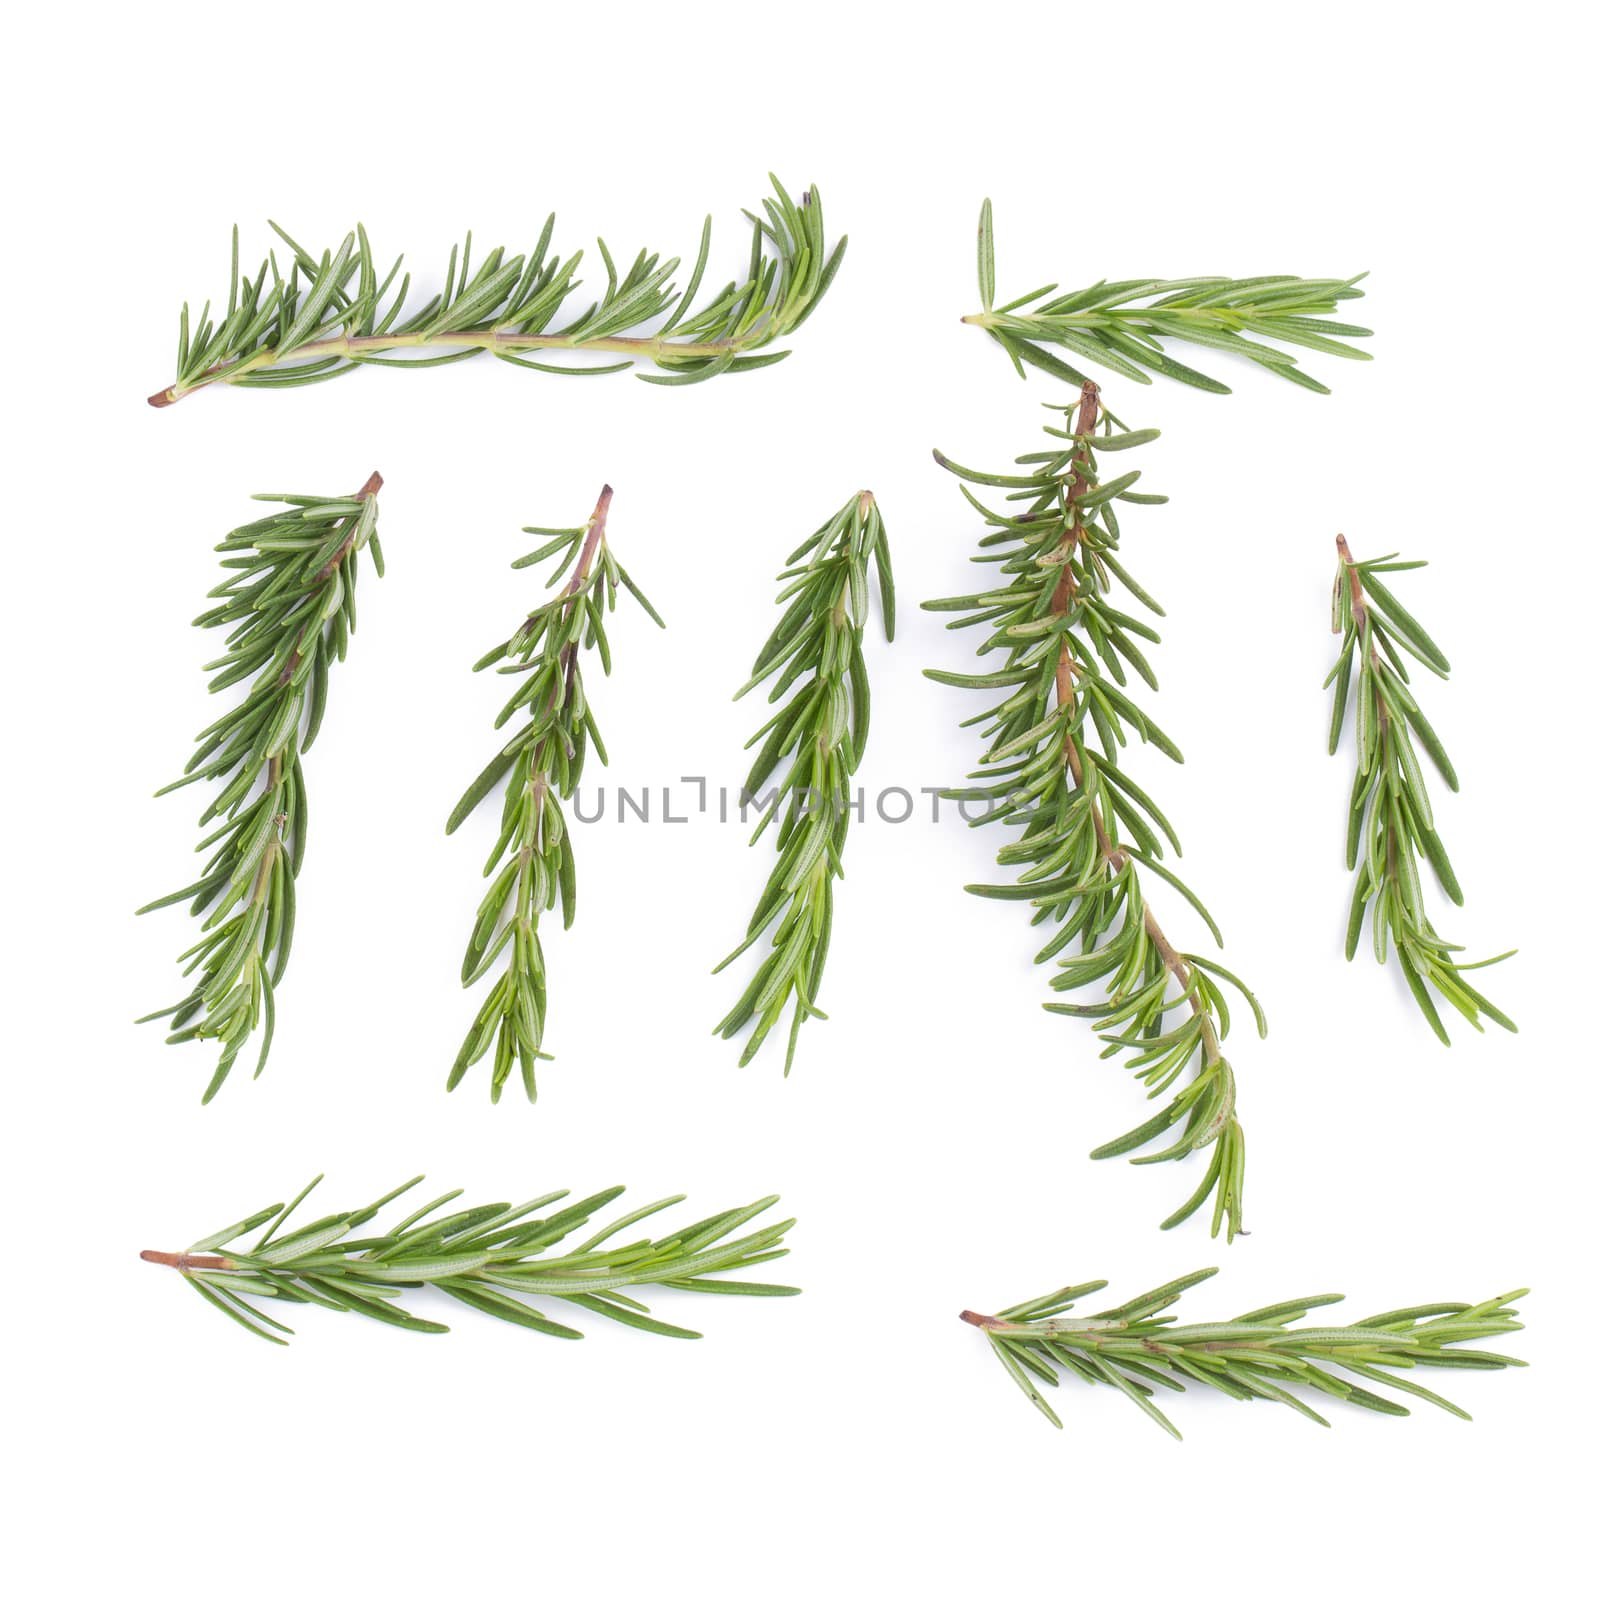 rosemary Herbs and Medicinal herbs. Organic healing herbs. fresh rosemary bunch rosemary isolated on white background